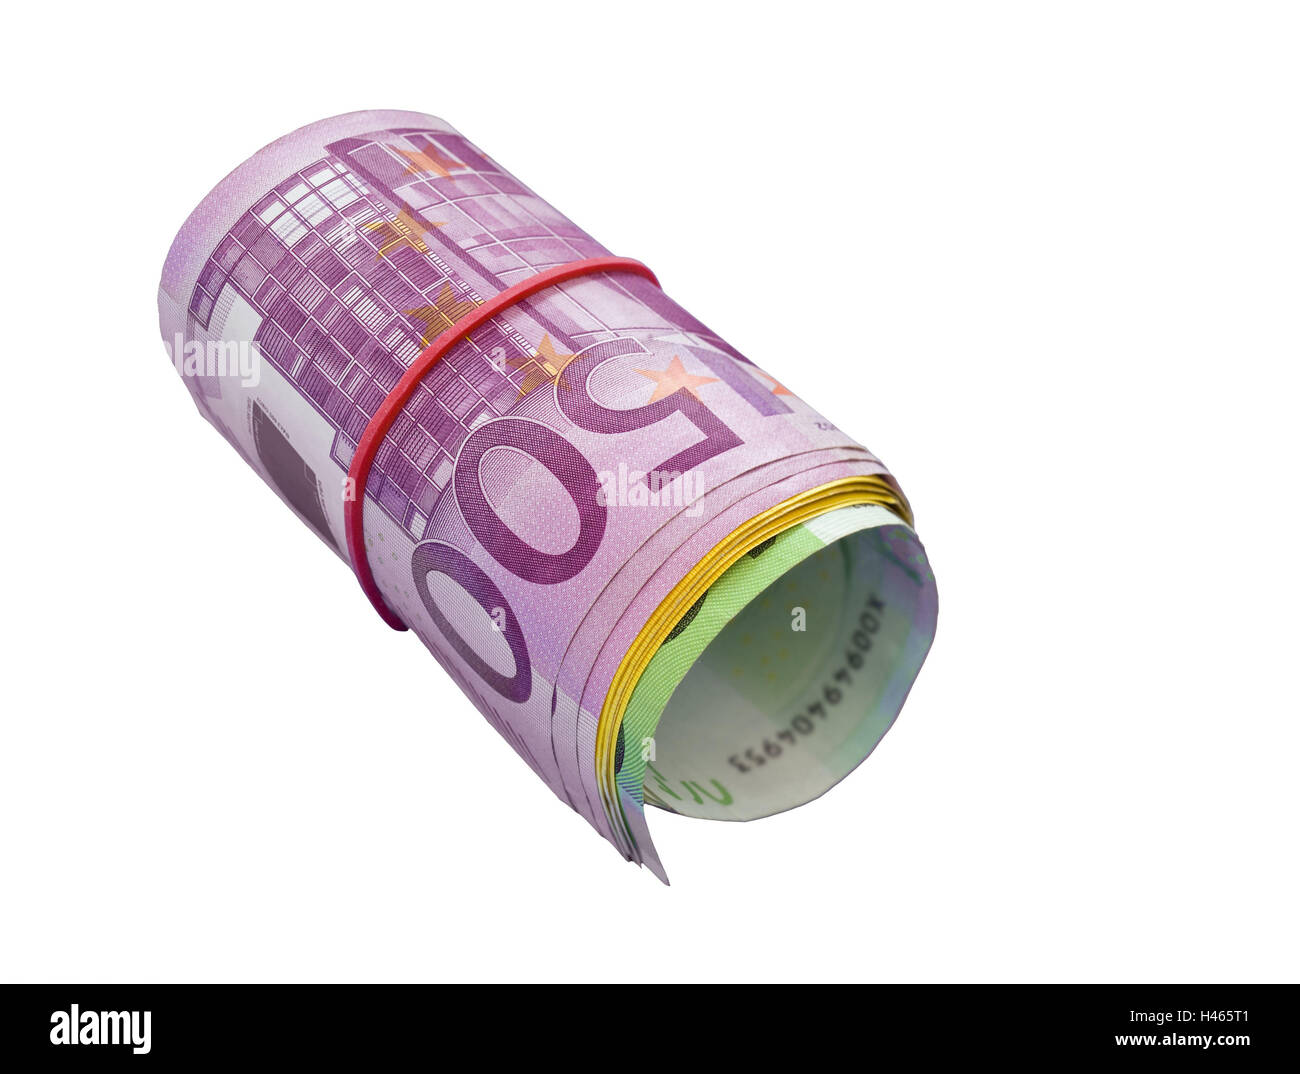 Banknotes, tracts, rolled up, rubber, money, cash, notes, euro, euros, euronotes, role, scrolled, amount, rubber banding, foreign currency, currency smugglings, money-laundering, save, savings, saved, bank crisis, conception, product photography, studio, cut out, Stock Photo